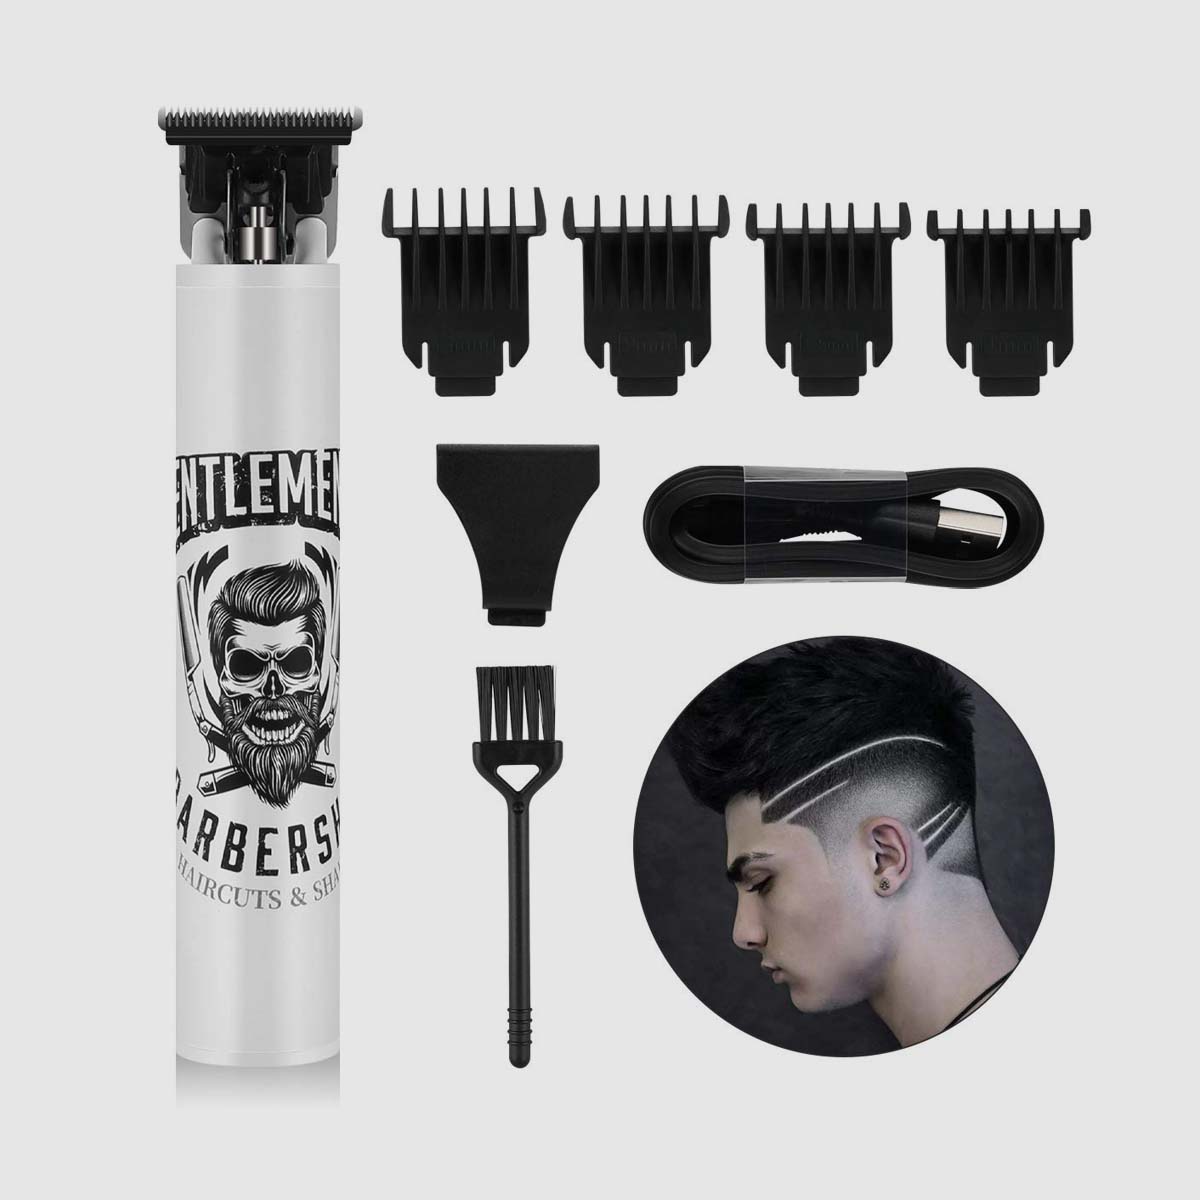 Electric Pro Li Outliner Clippers Barber Grooming Kit - 0 